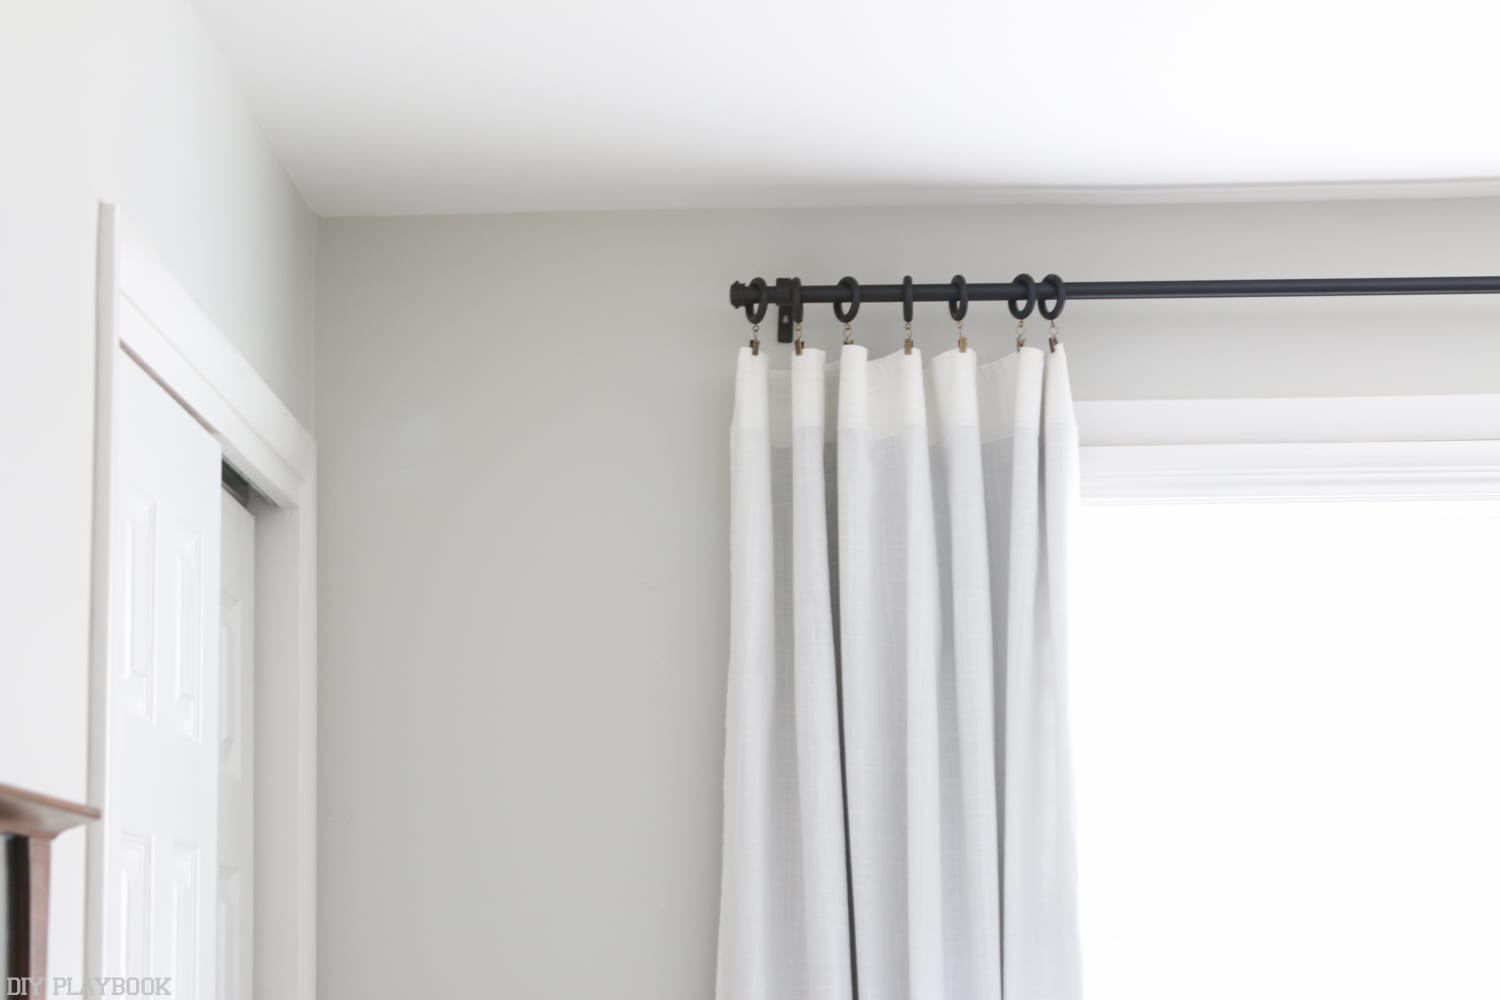 How to hang curtains high and wide to make your window appear larger